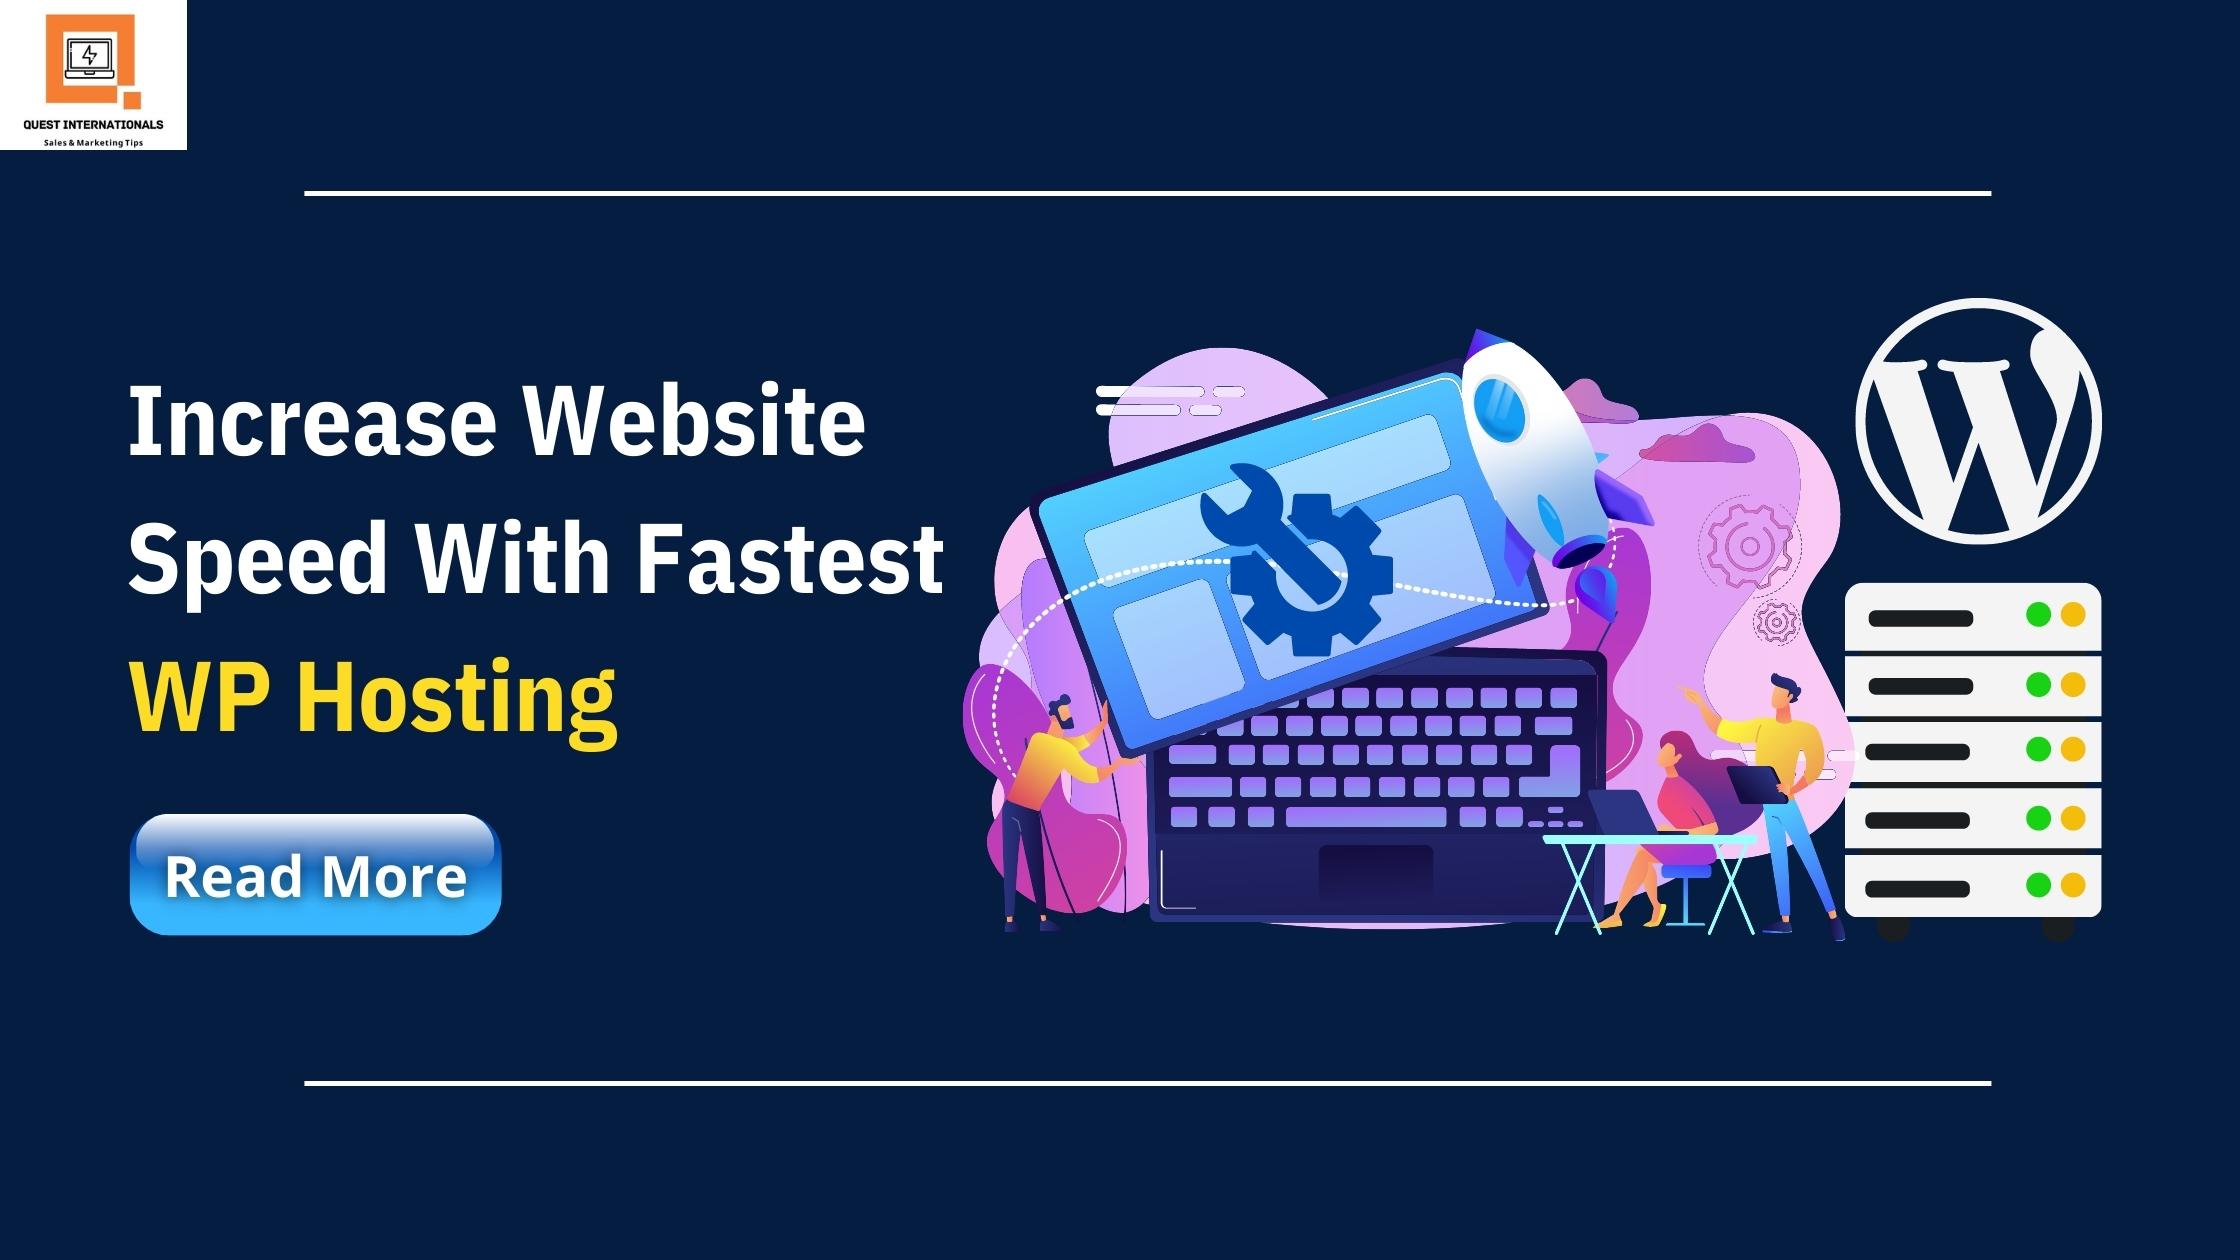 You are currently viewing Increase Website Speed With Fastest WP Hosting